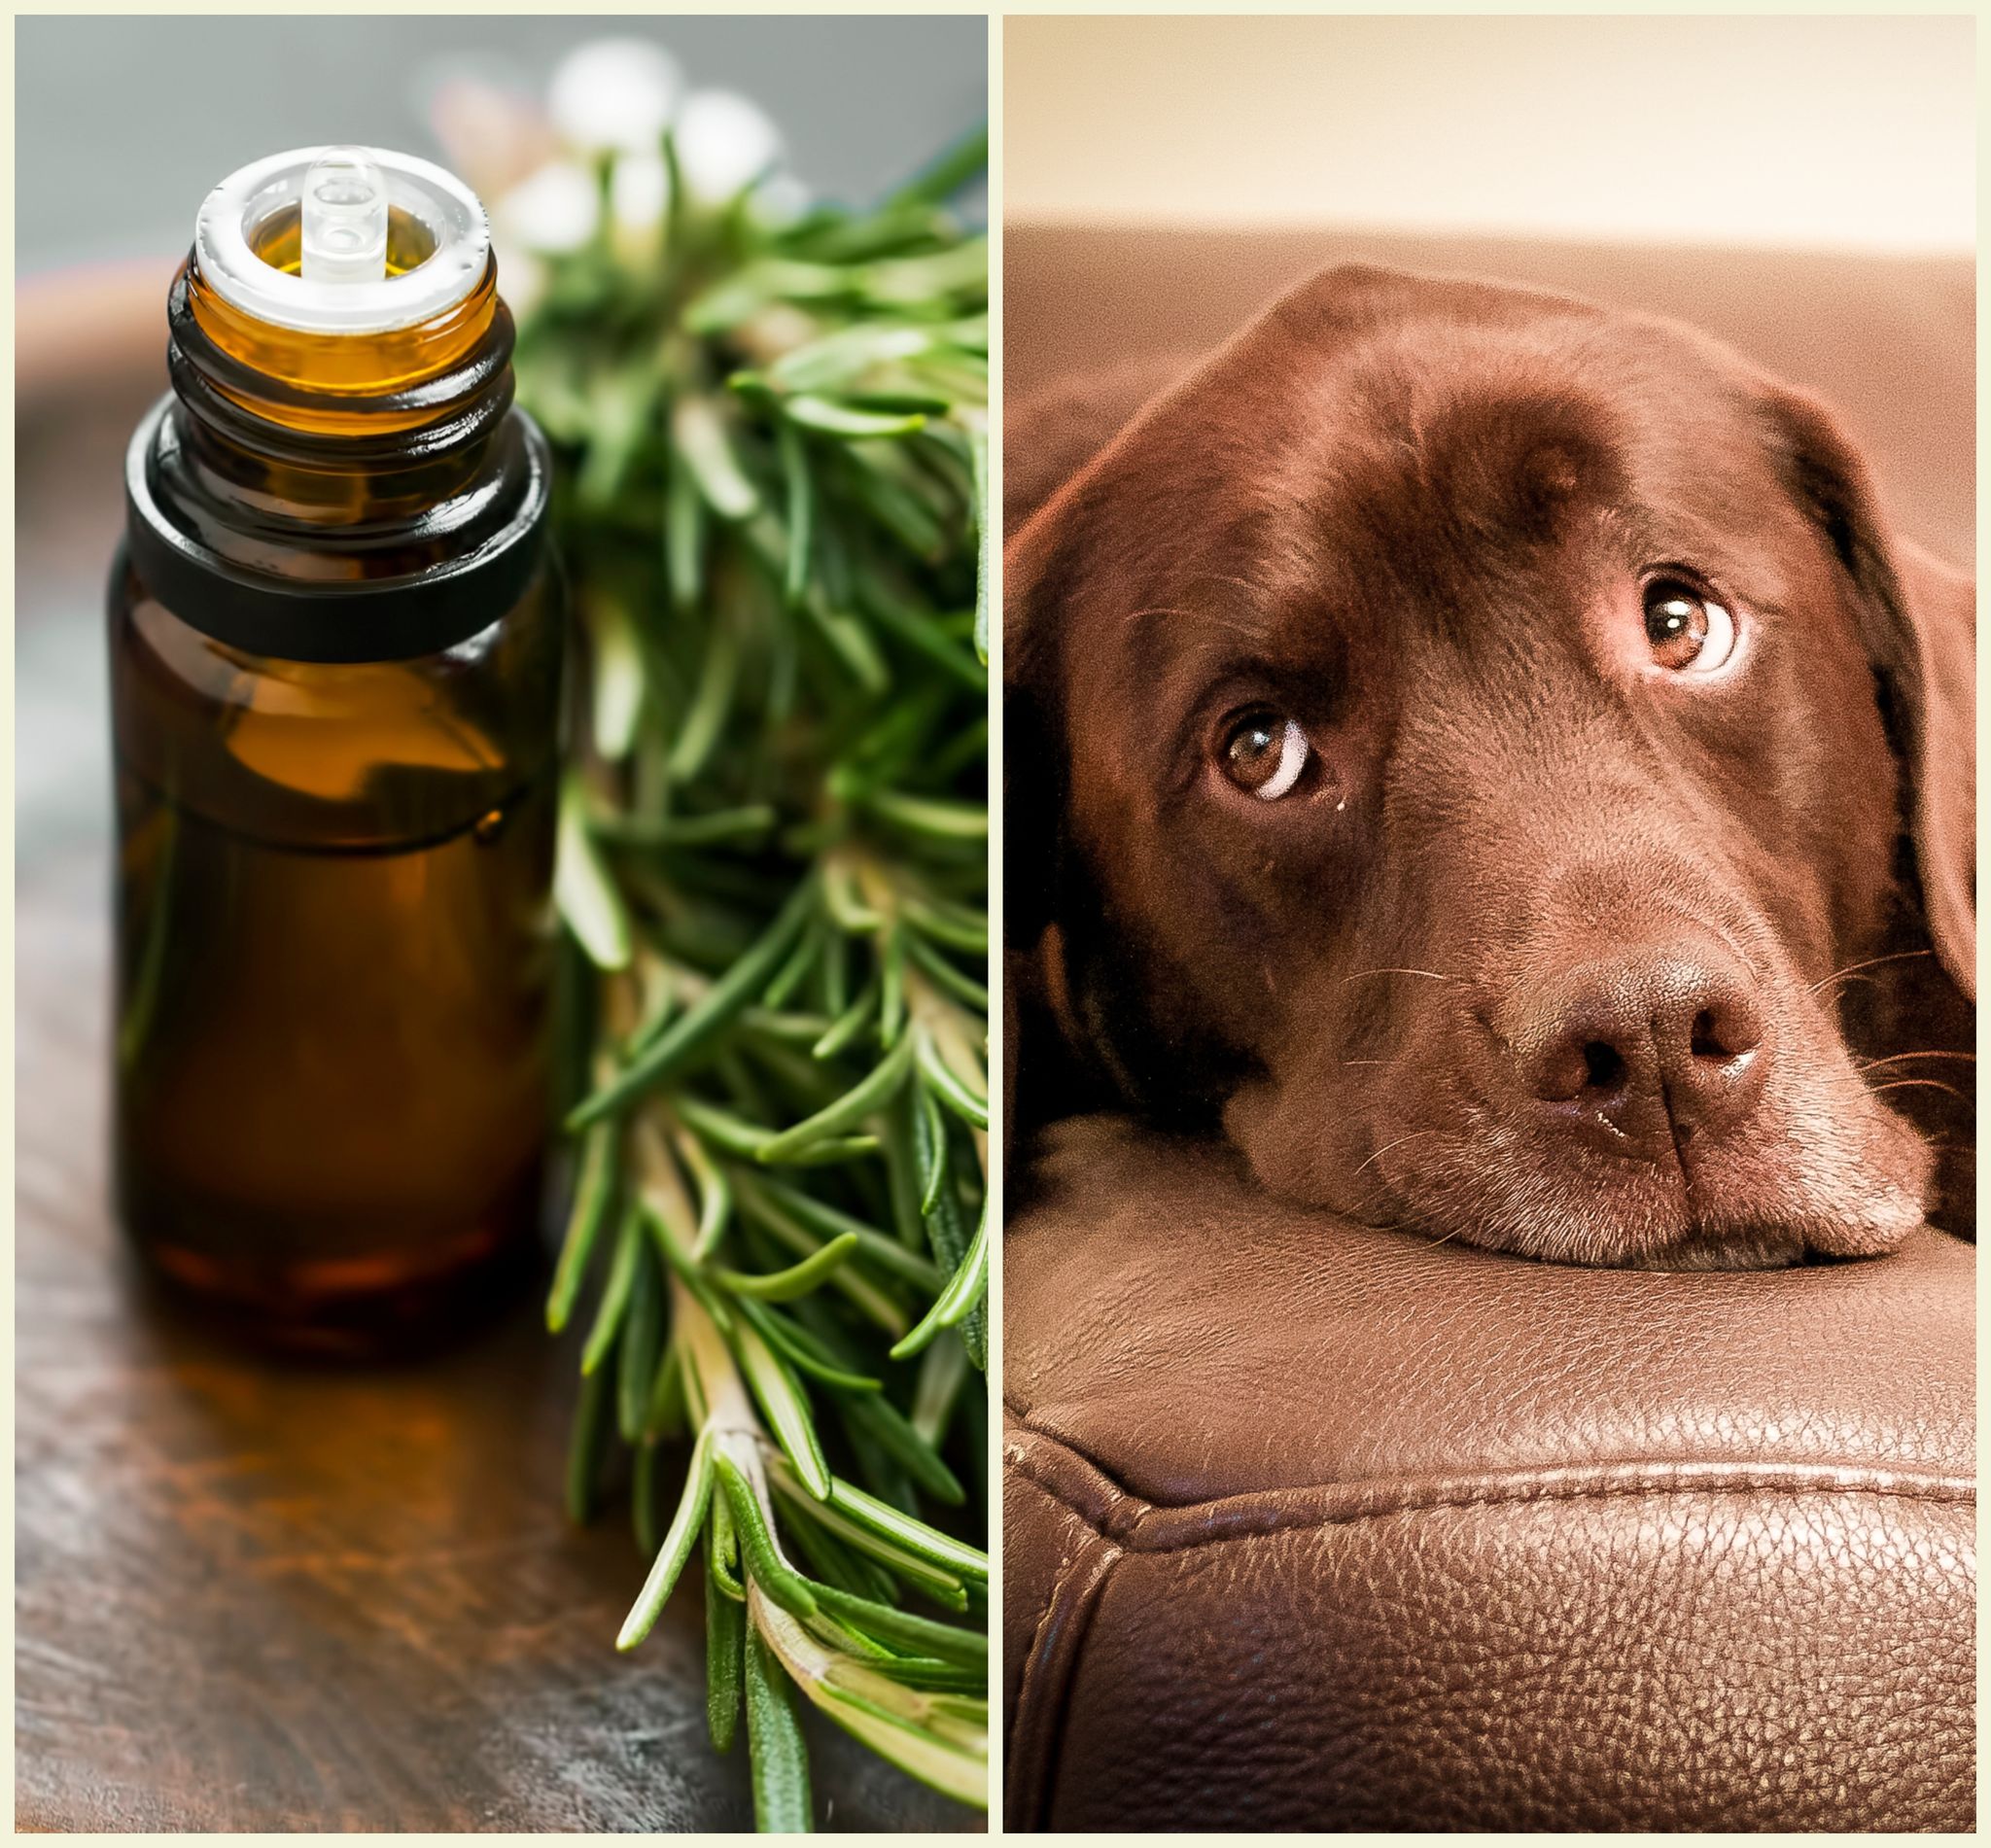 Essential Oils Toxic to Dogs in Diffuser: What You Need to Know